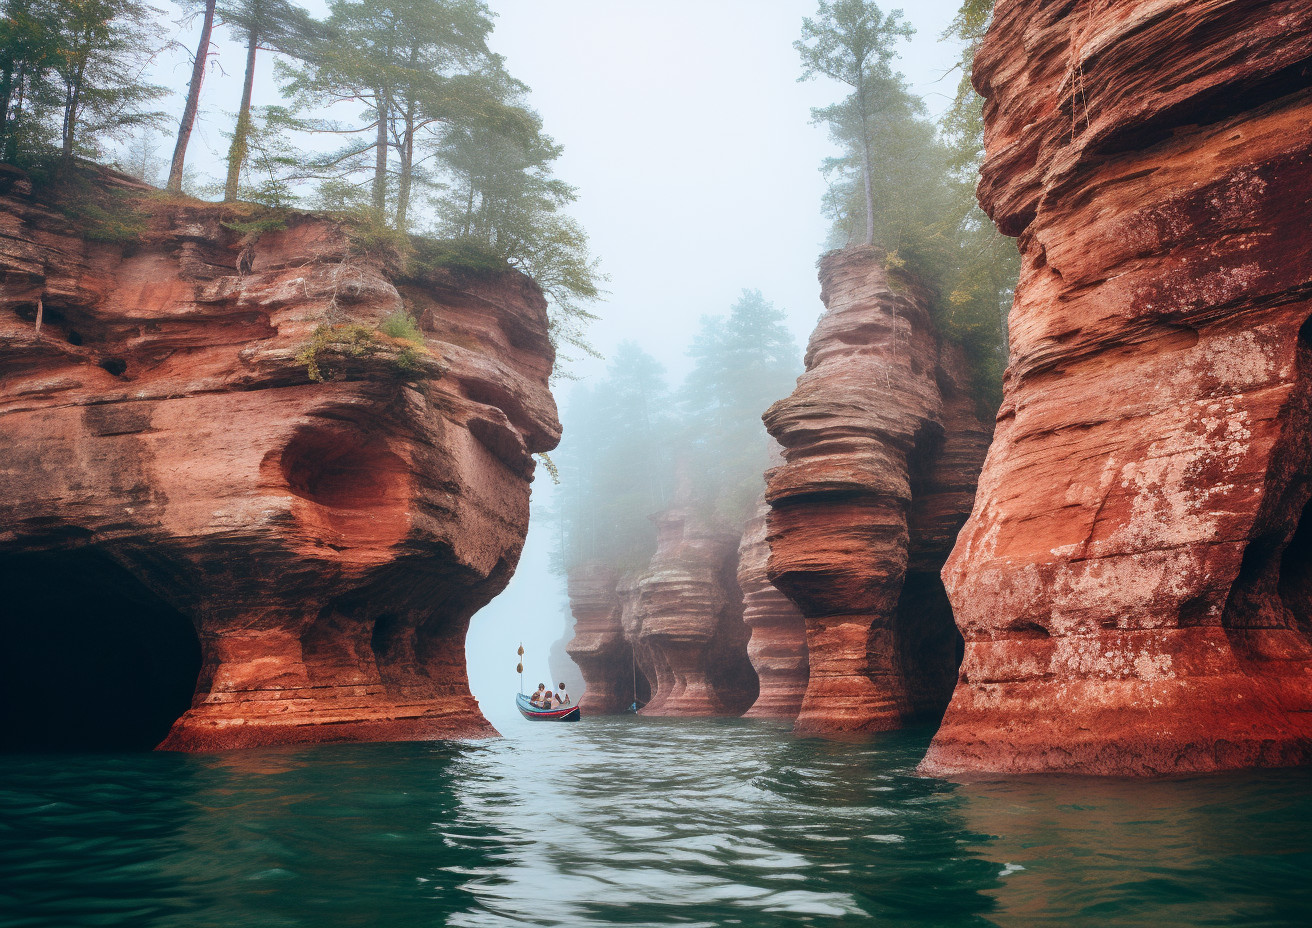 Digital art inspired by Apostle Islands, WI